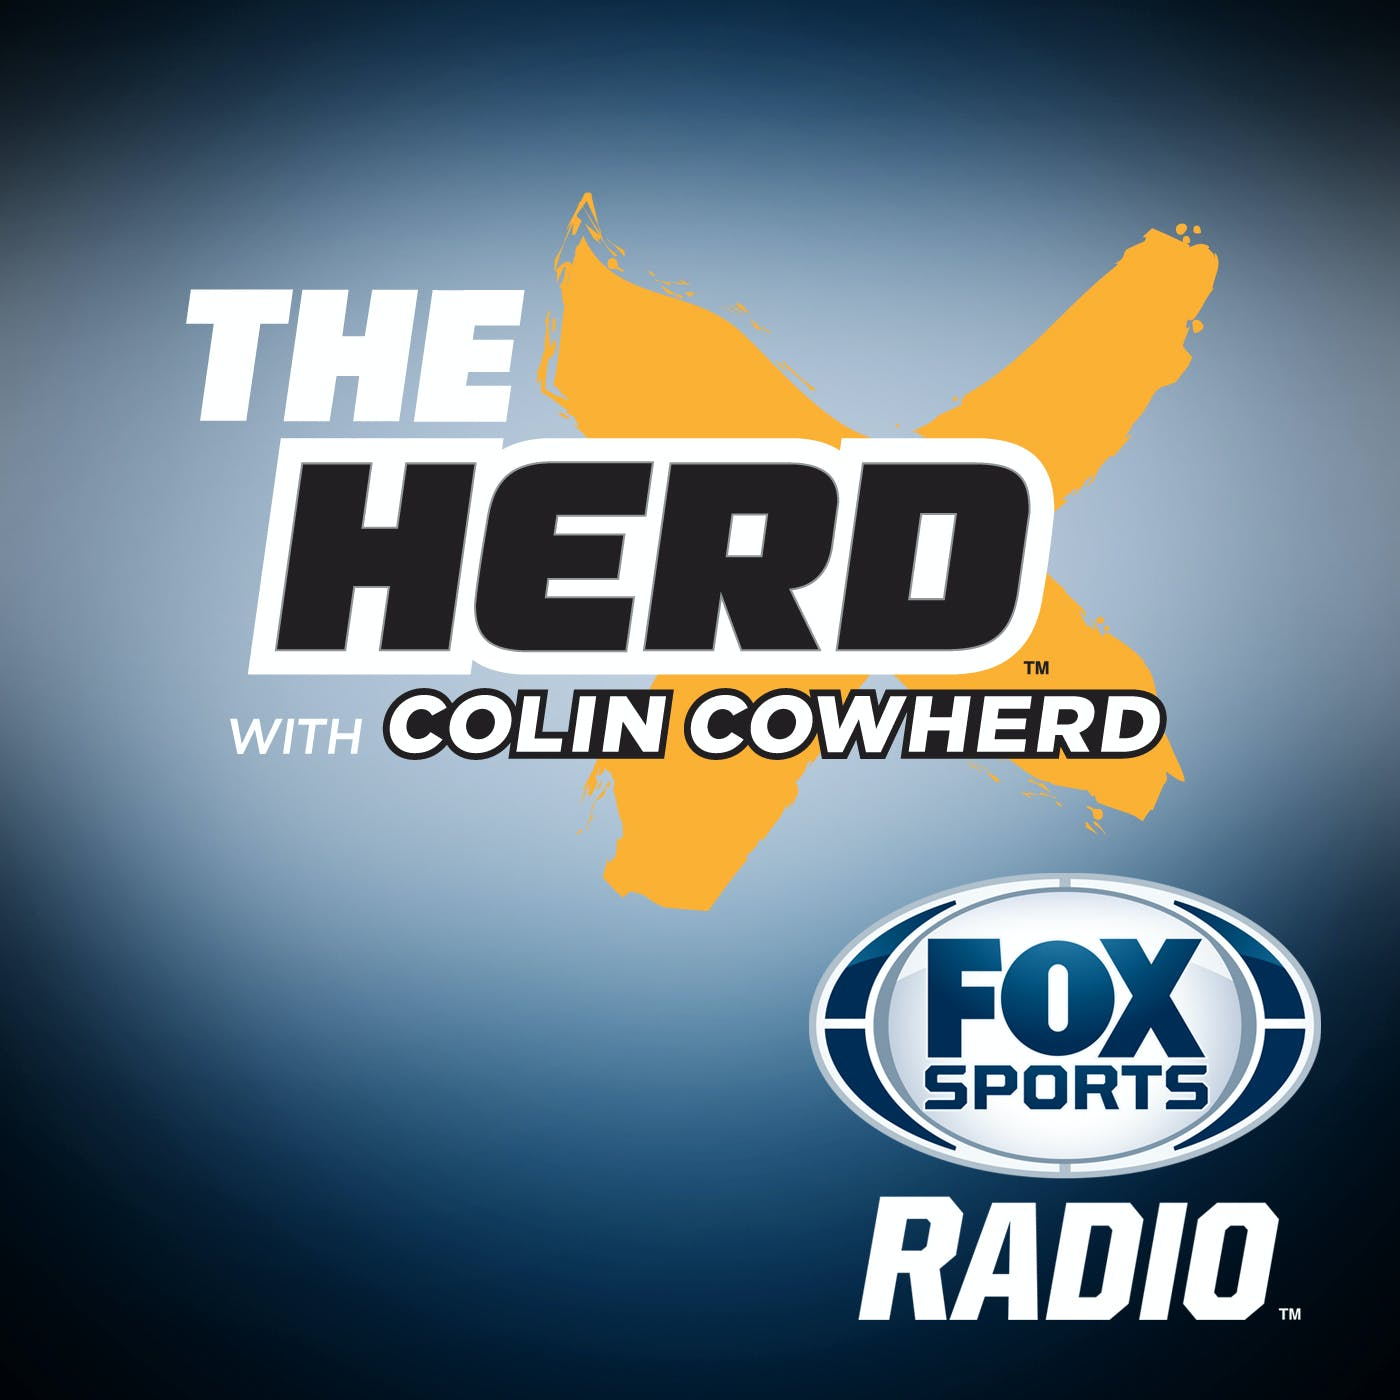 Cowboys-Raiders, taking risks, Lakers, and the Herd hierarchy